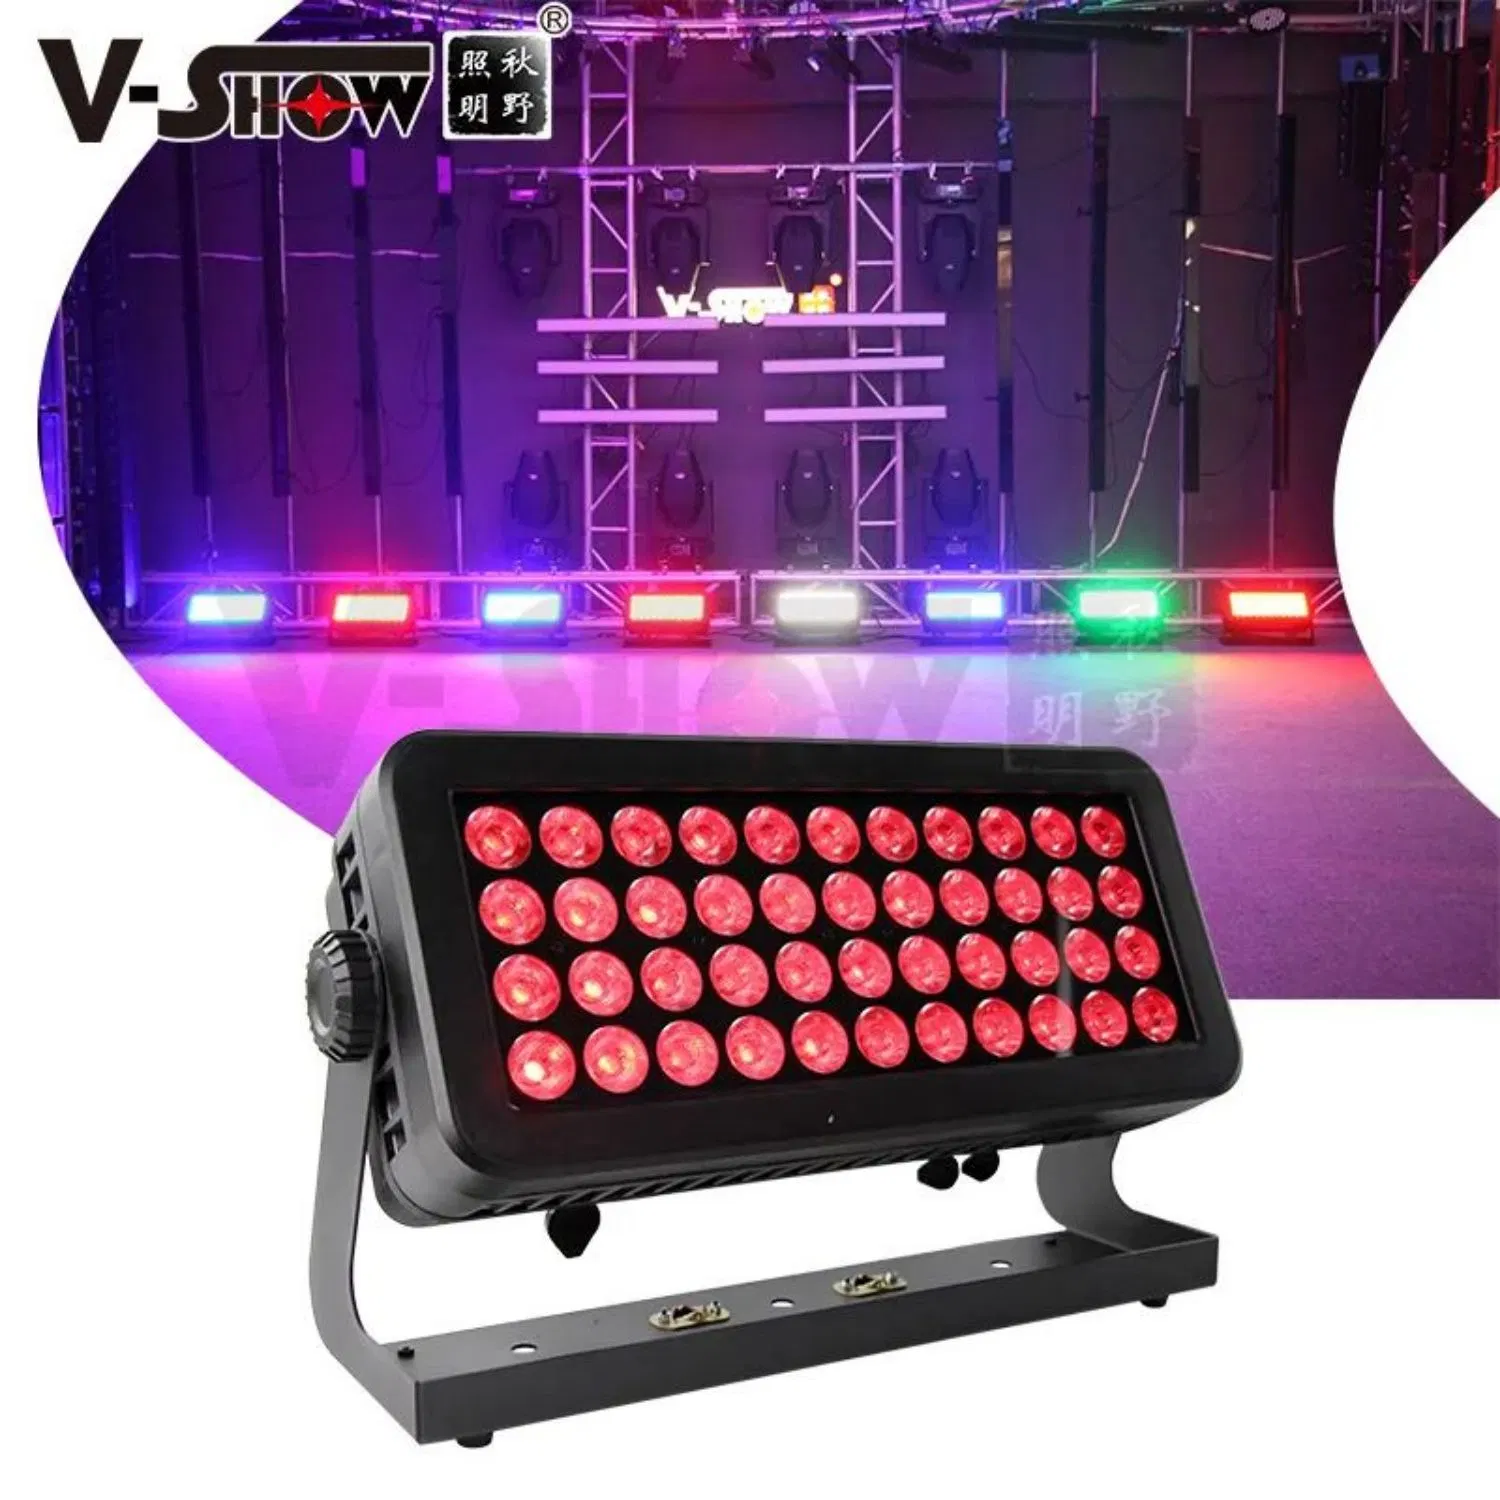 V-Show IP 65 Wash Light 44*10 RGBW 4 in 1 Stage Lighting for Outdoor Stage Party